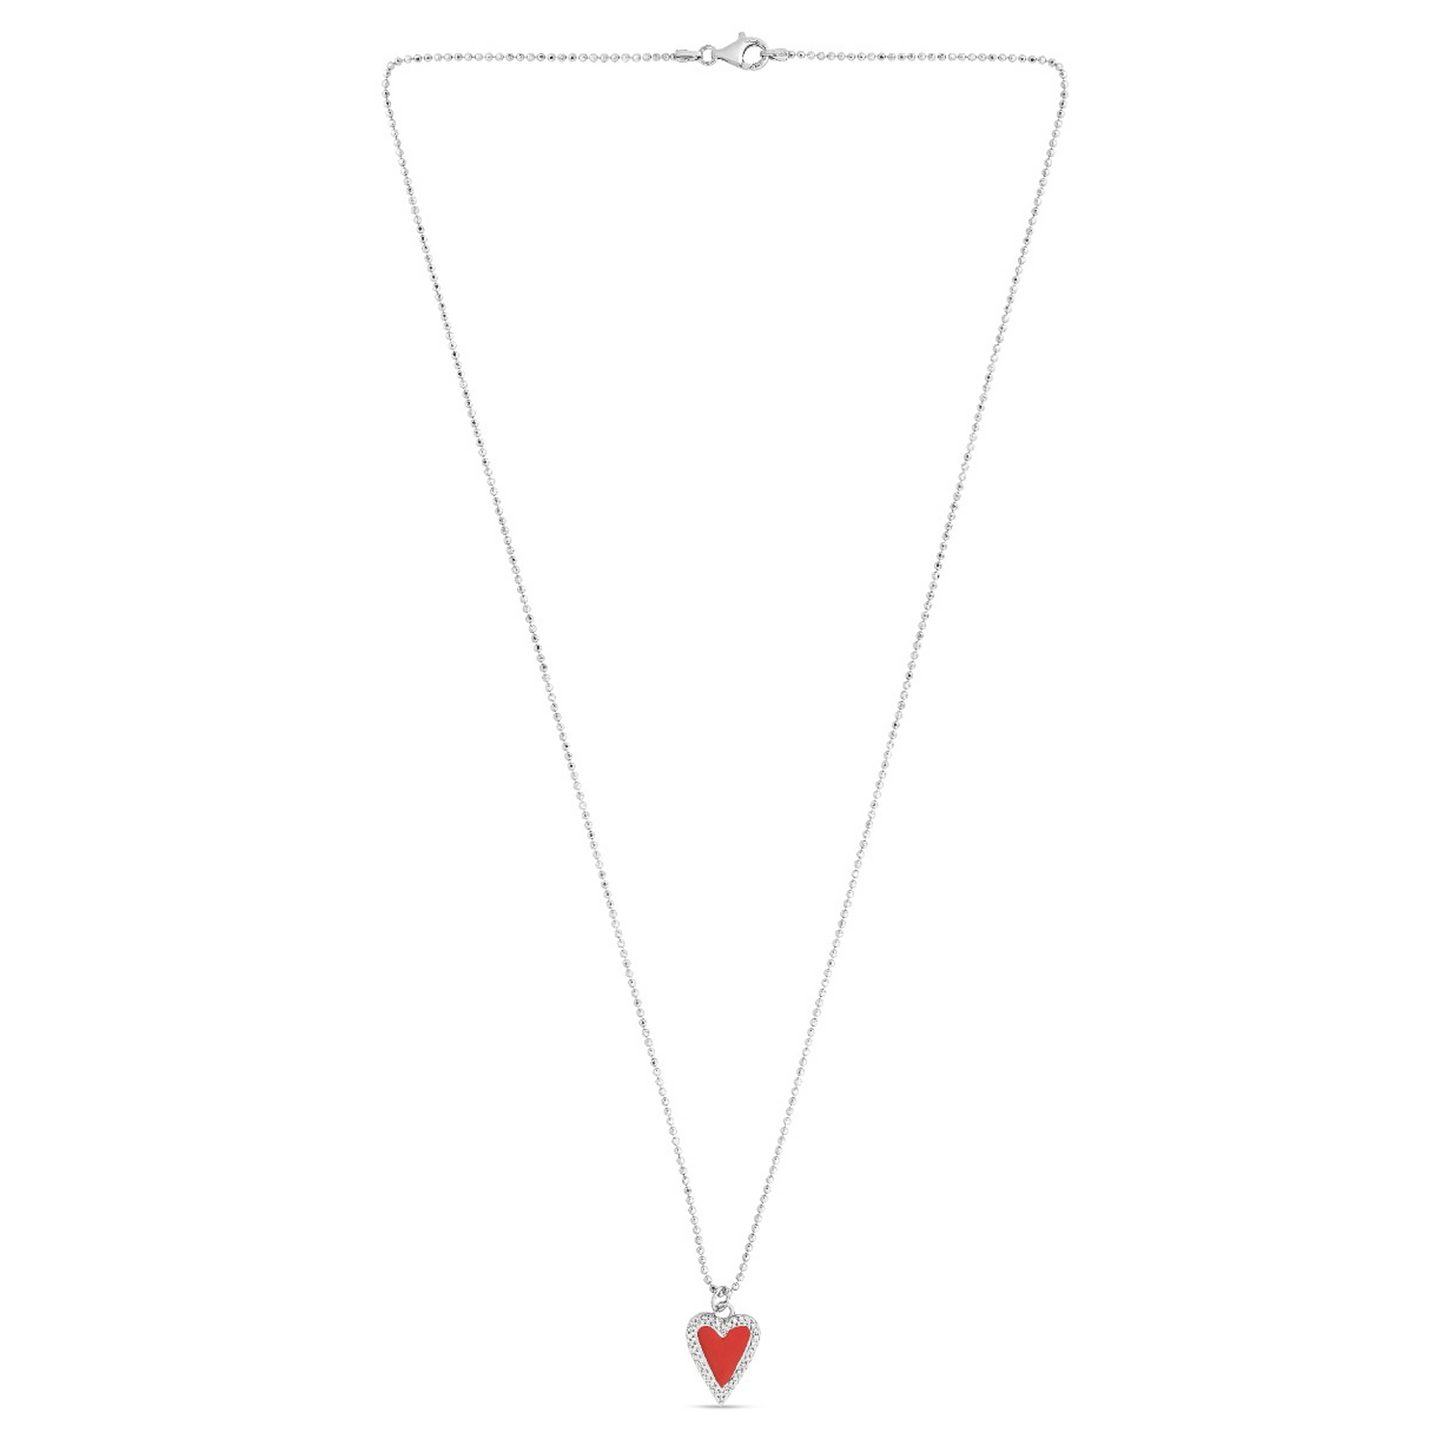 Sterling Silver Red Enamel Heart Necklace on Bead Chain with Lobster Clasp